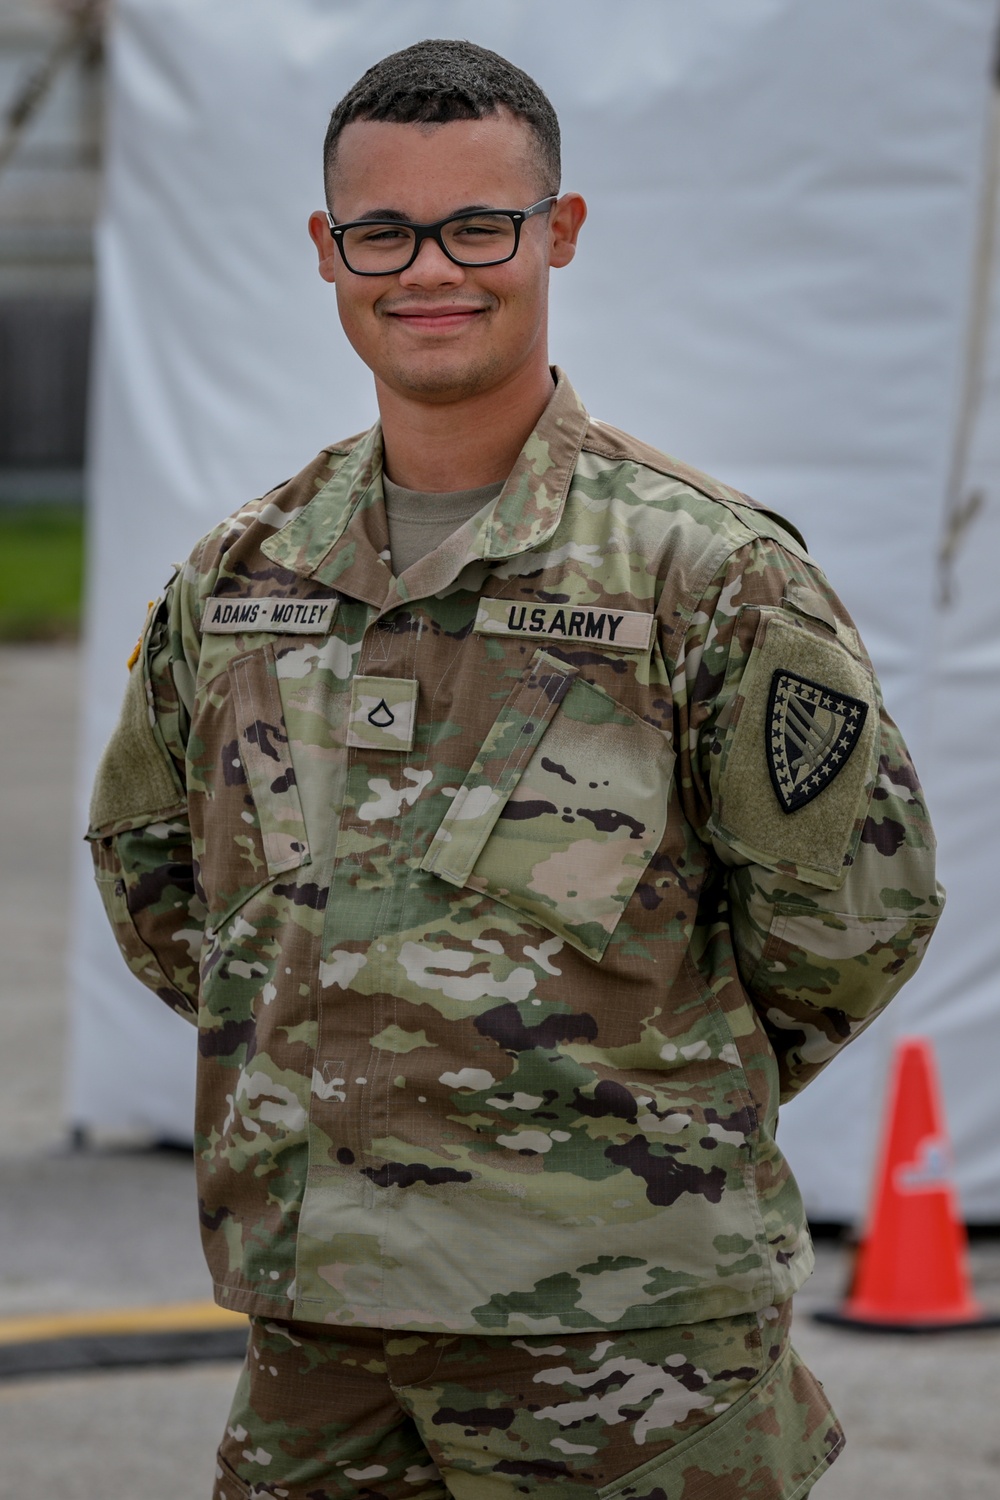 U.S. Army Pfc. Nicholas Adams-Motley talks about his role in the COVID-19 missions in Indiana